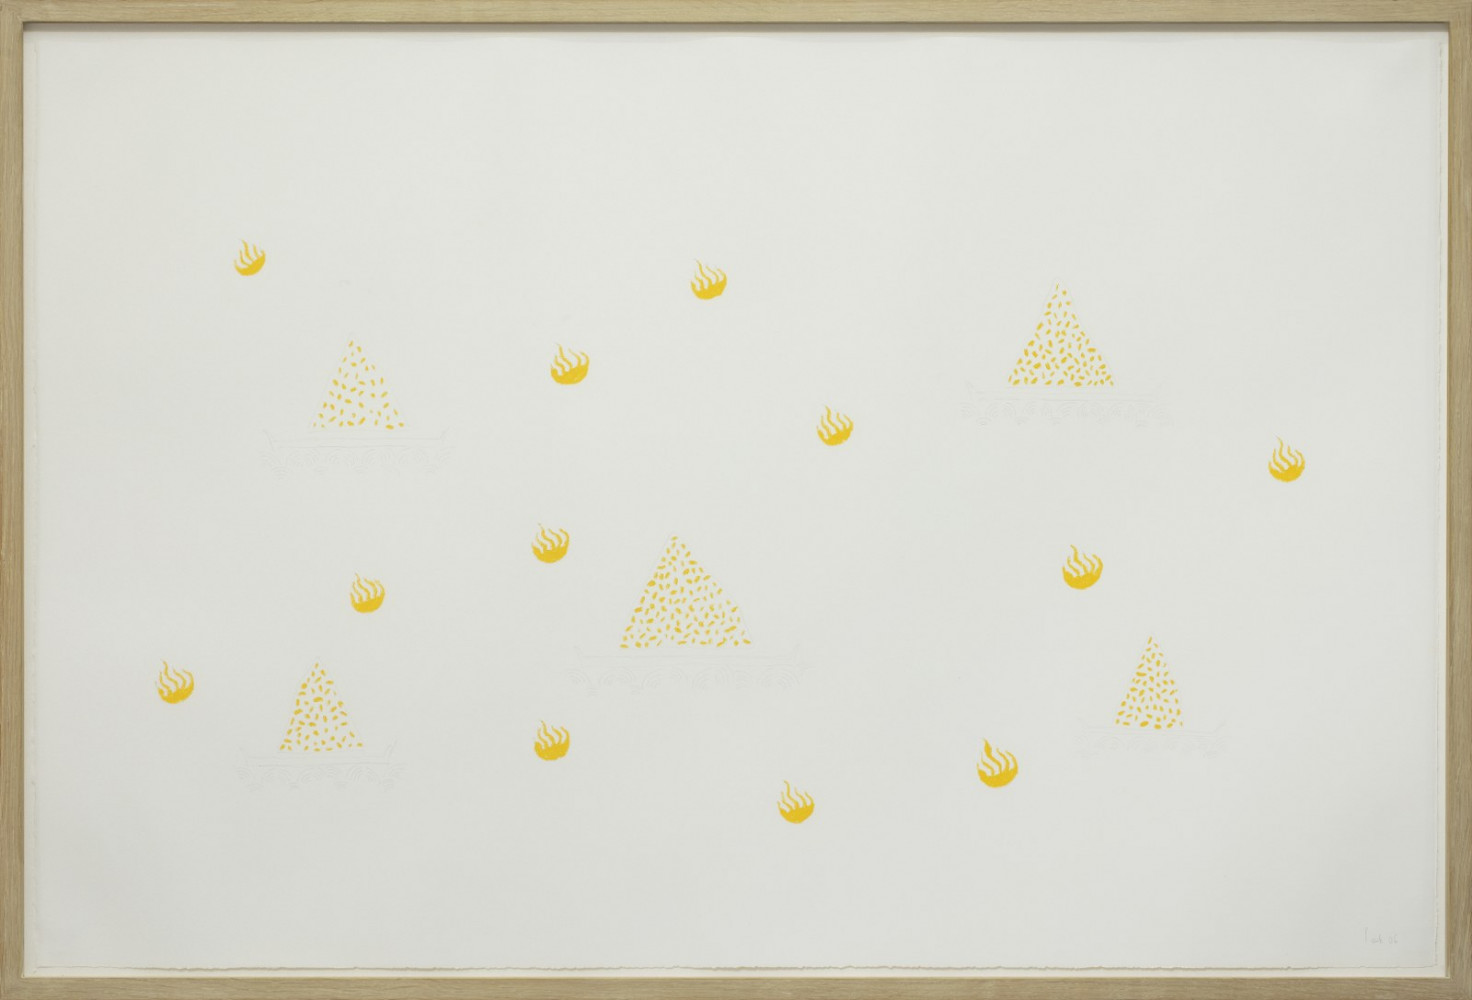 Wolfgang Laib, ‘Untitled, 2006’, yellow orange, wax crayon and pencil on paper, 